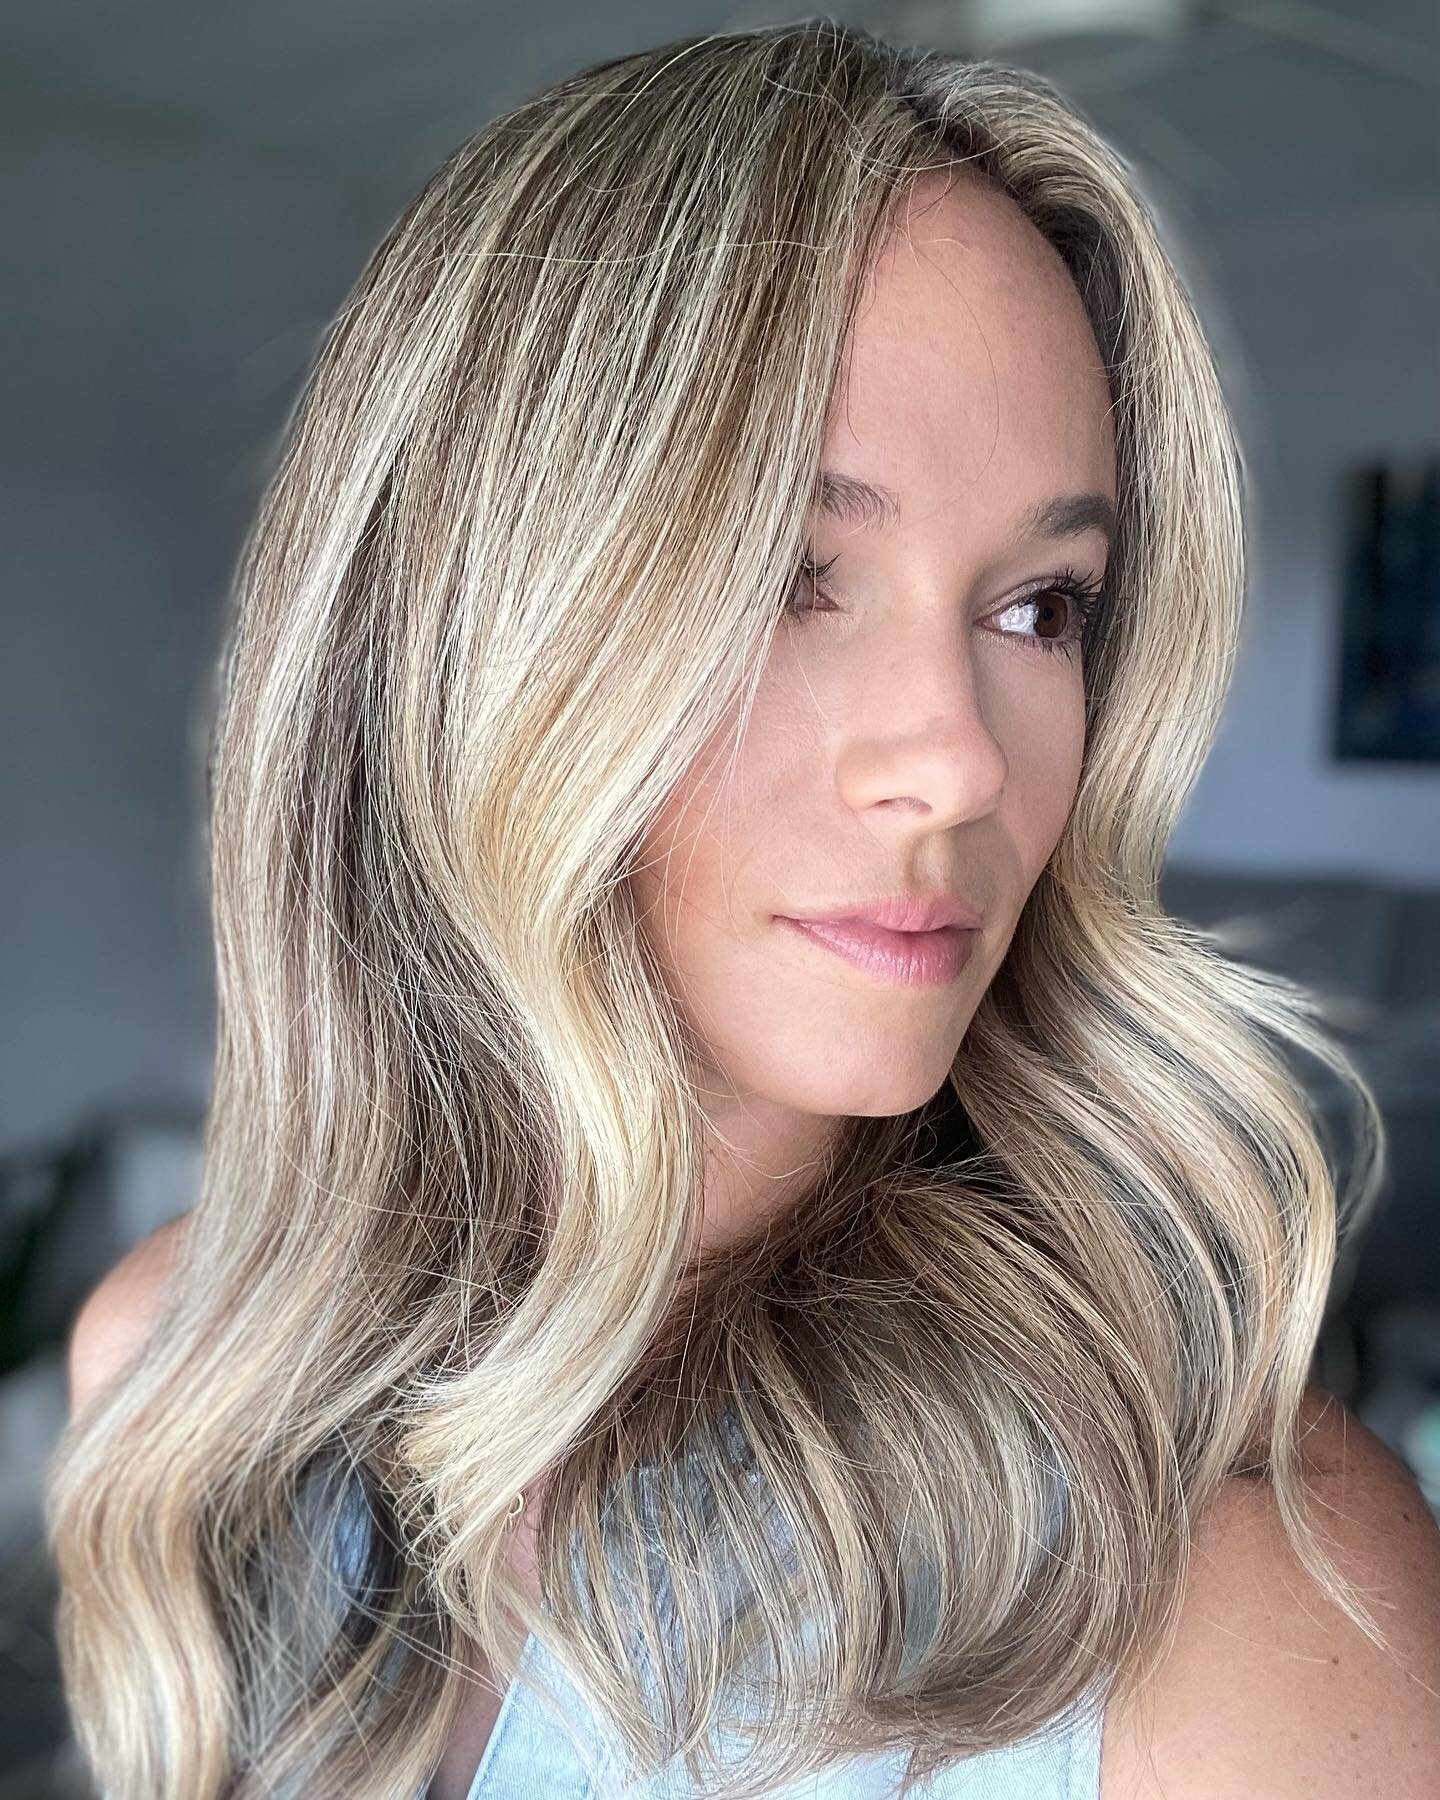 Soft dimensional blonde lifted with @schwarzkopfusa Blondeme and @olaplex. No toners needed! Cut and color by Kimmi